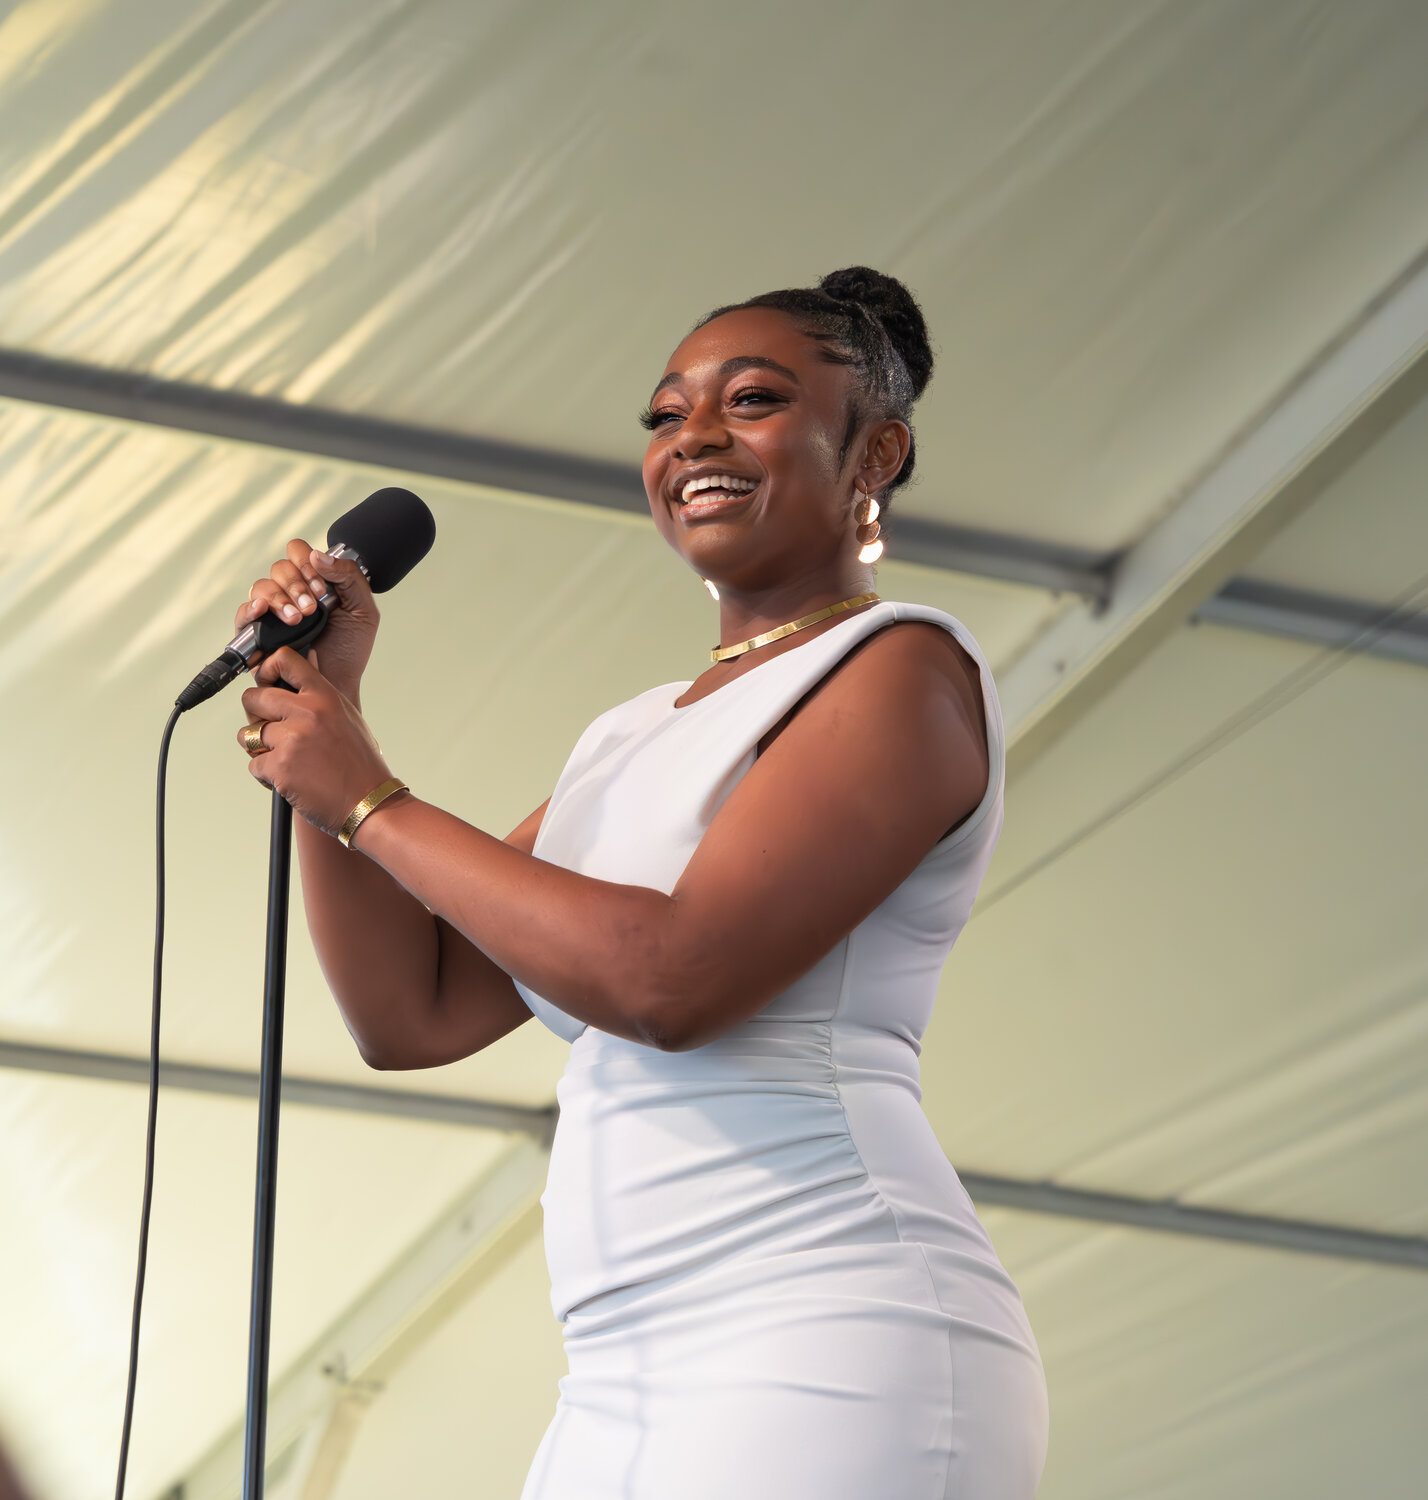 GRAMMY-winning Jazz vocalist Samara Joy, 23, opens her set with a smile at the Newport Jazz Festival on Sunday, August 6. This is Samara's second appearance at the Jazz Festival.